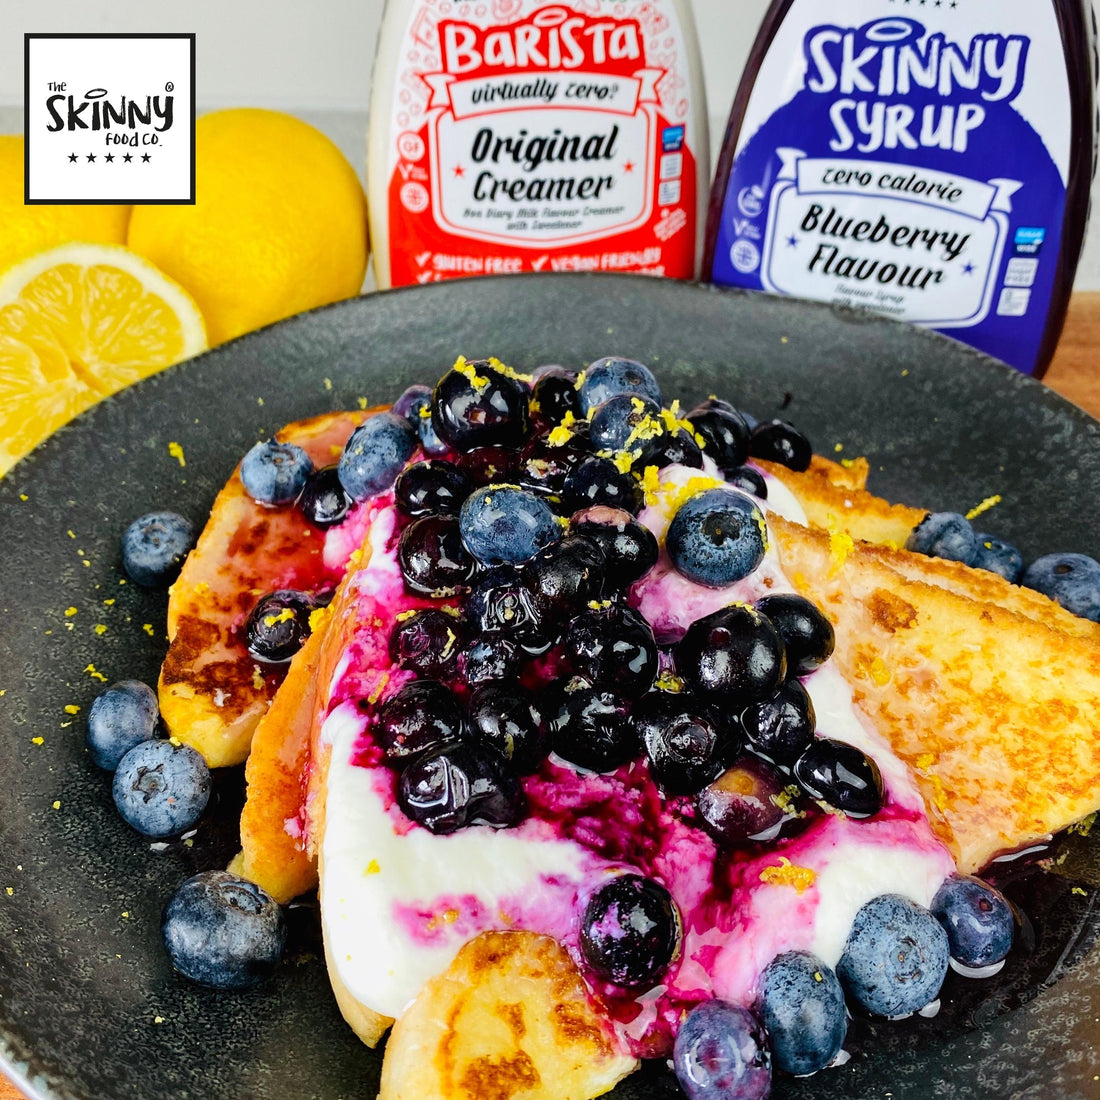 How To Make French Toast - theskinnyfoodco